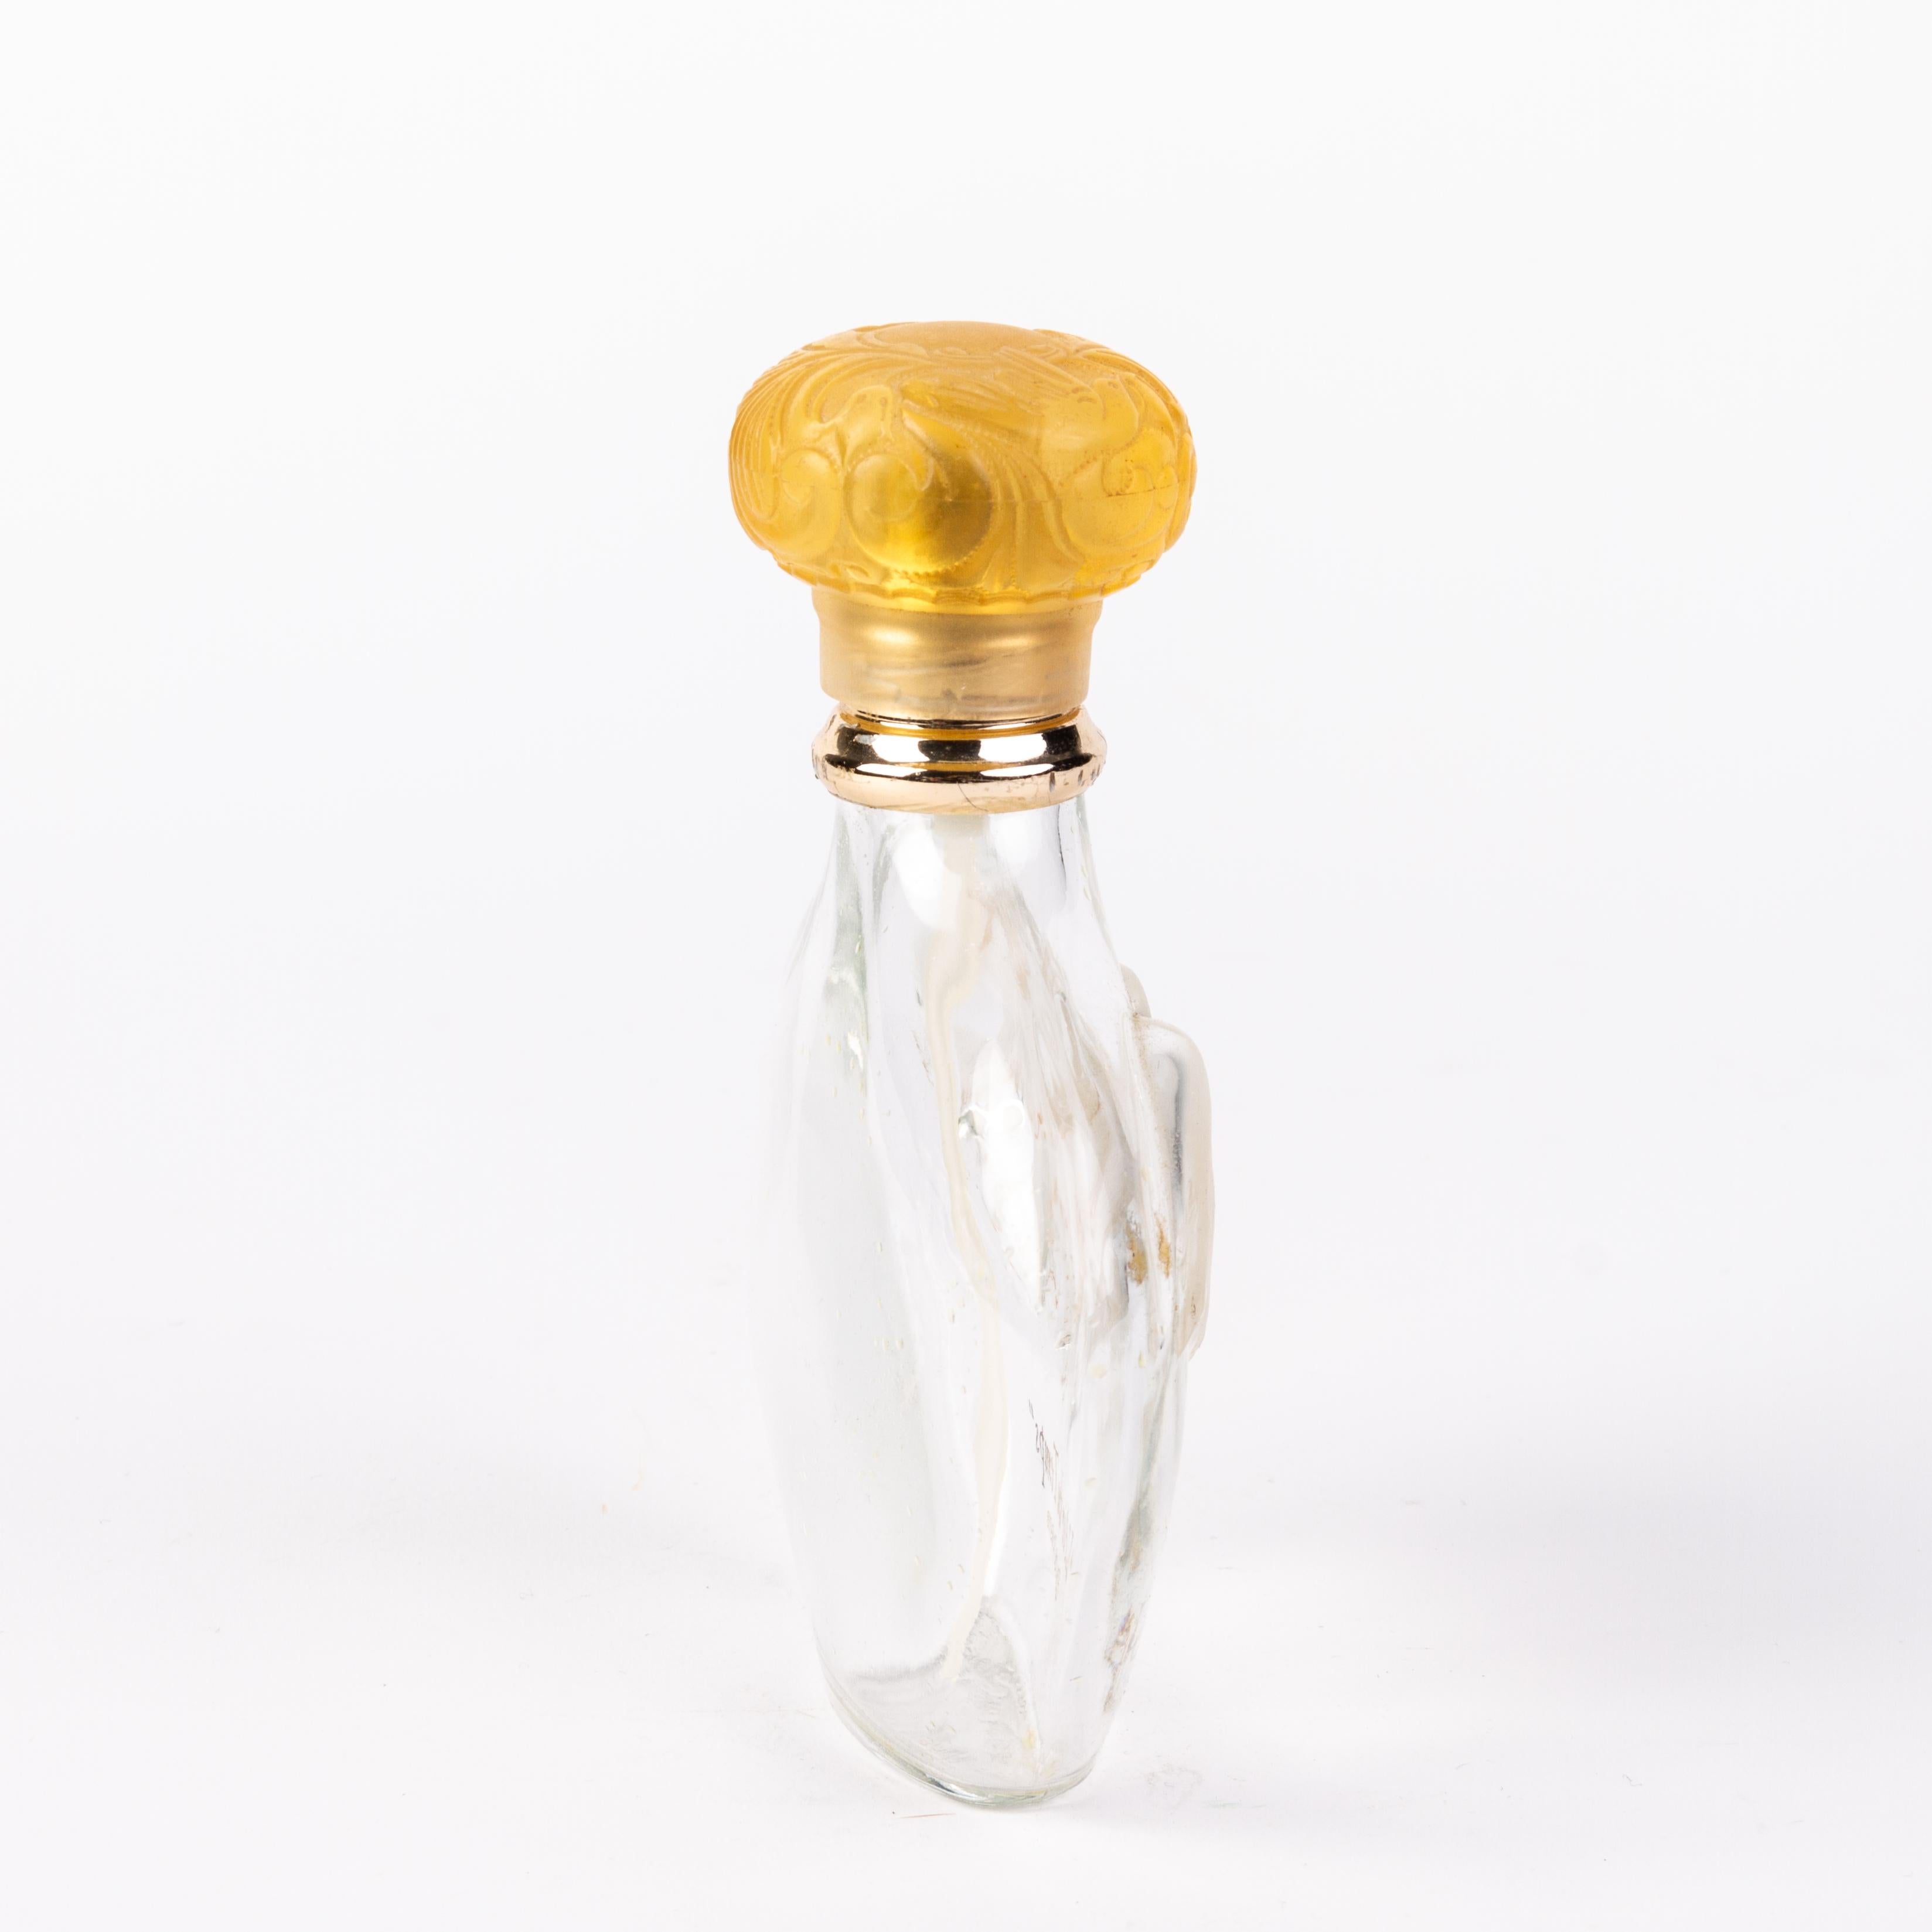 In good condition
From a private collection
Free international shipping
Lalique French Bas Relief Scent Perfume Bottle 